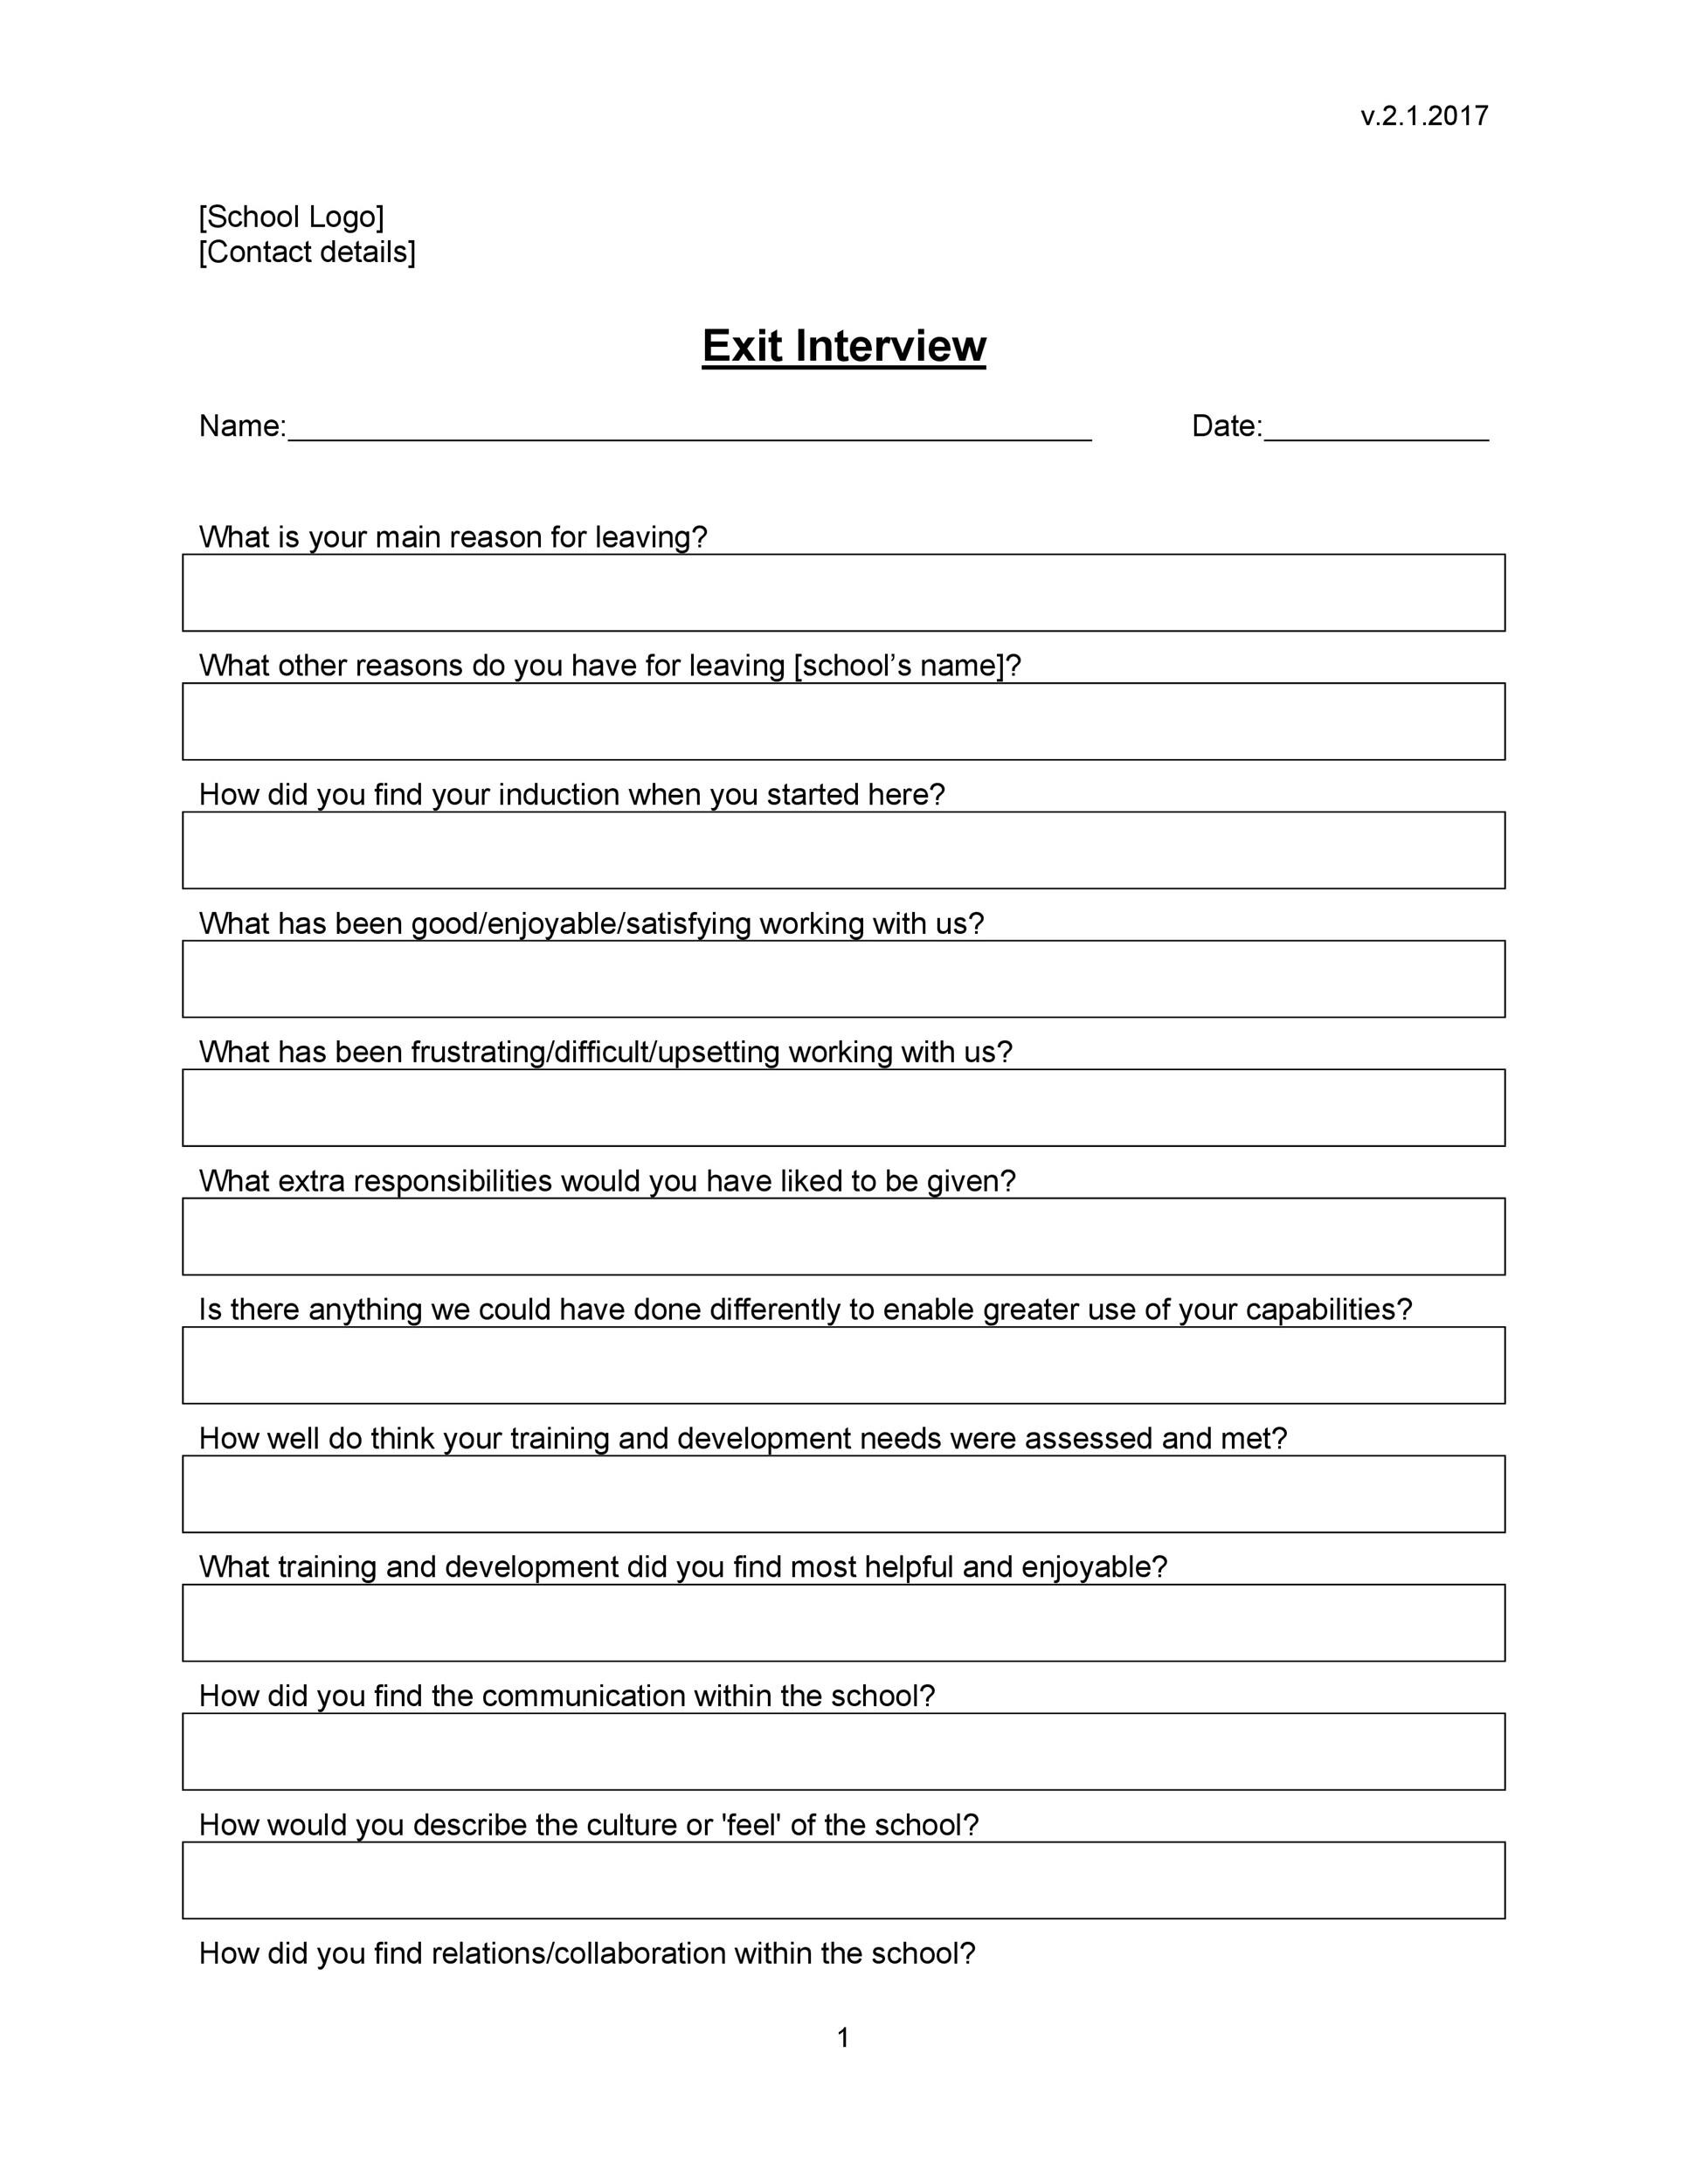 Free exit interview template 08